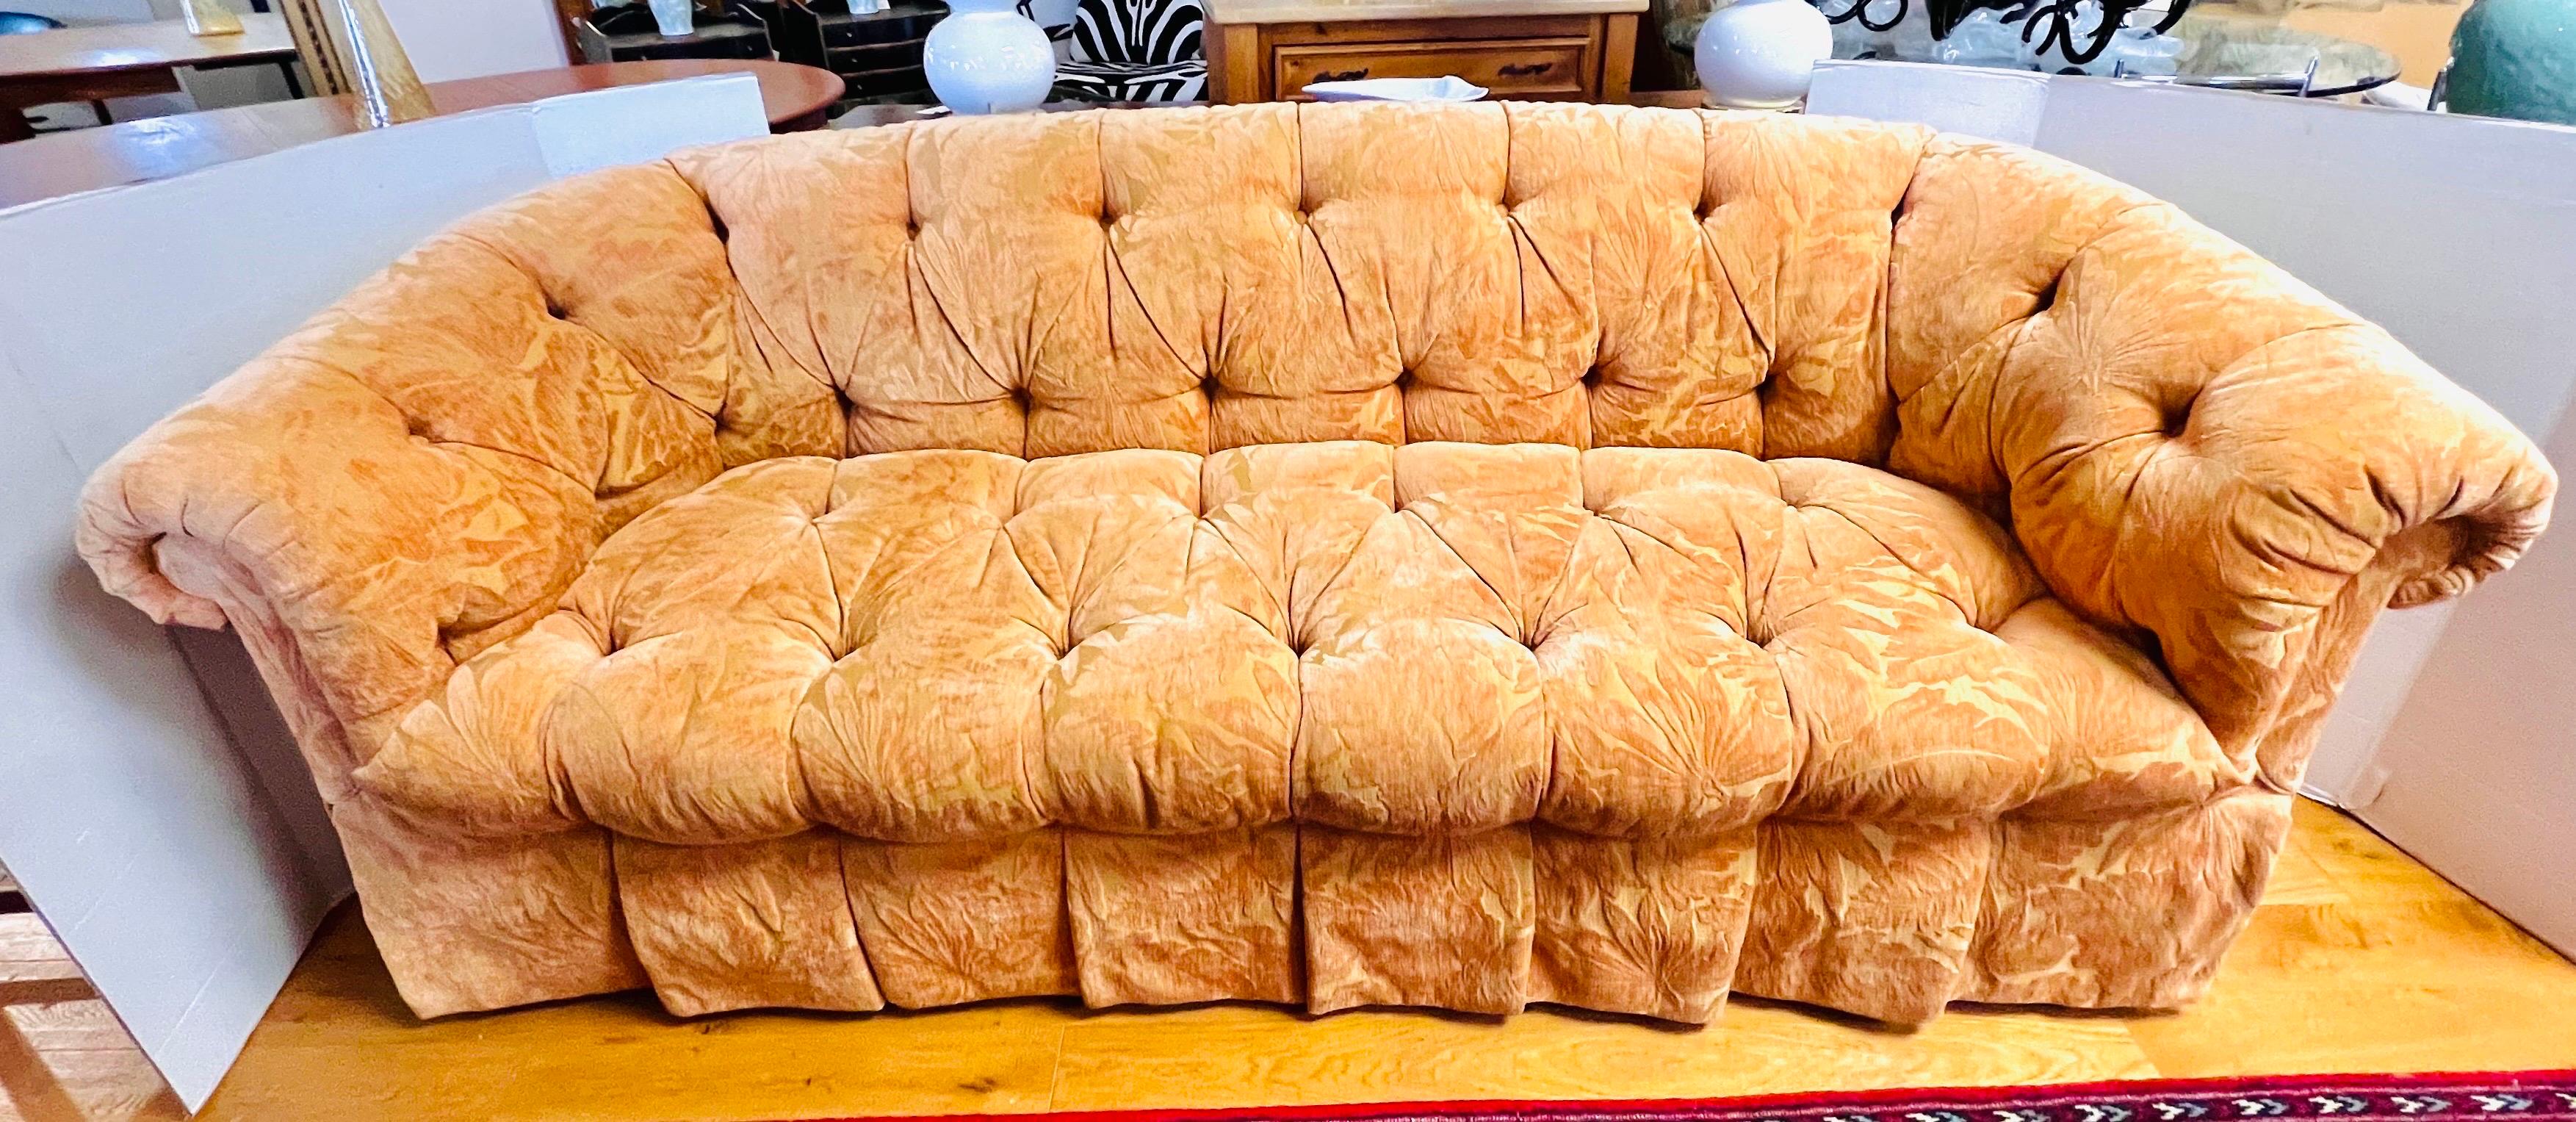 Custom tufted sofa with rolled arms and pleated skirt which is upholstered in a plush leaf print textured chenille fabric and button tufting on back and seat. The color is an exclusive gold/persimmon color, ultra luxurious looking. Comes with